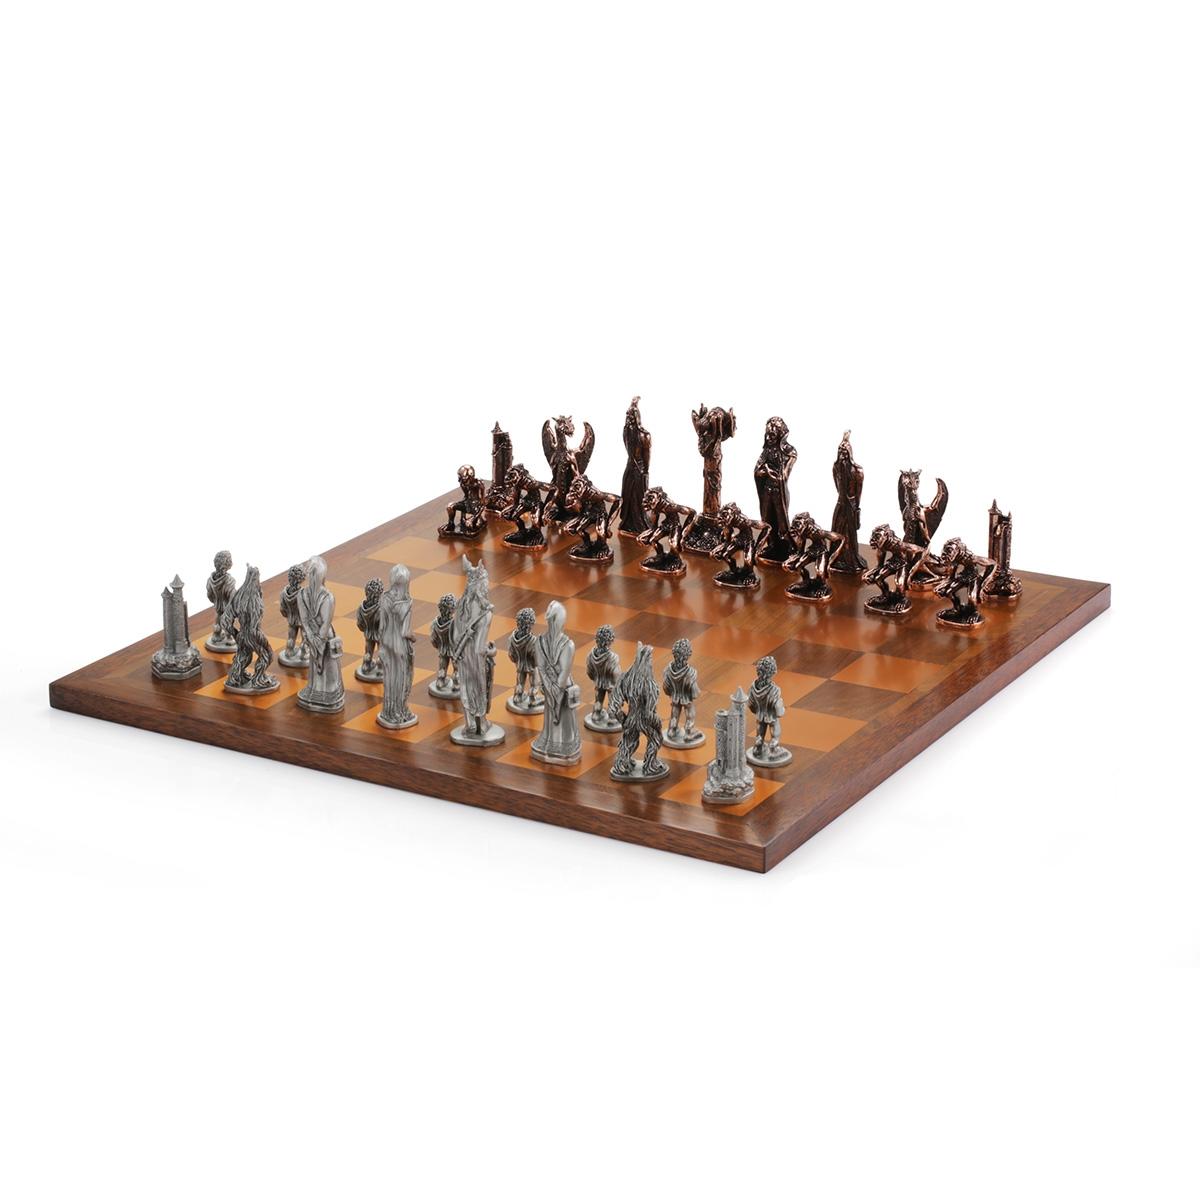 War of the Rings Chess Set